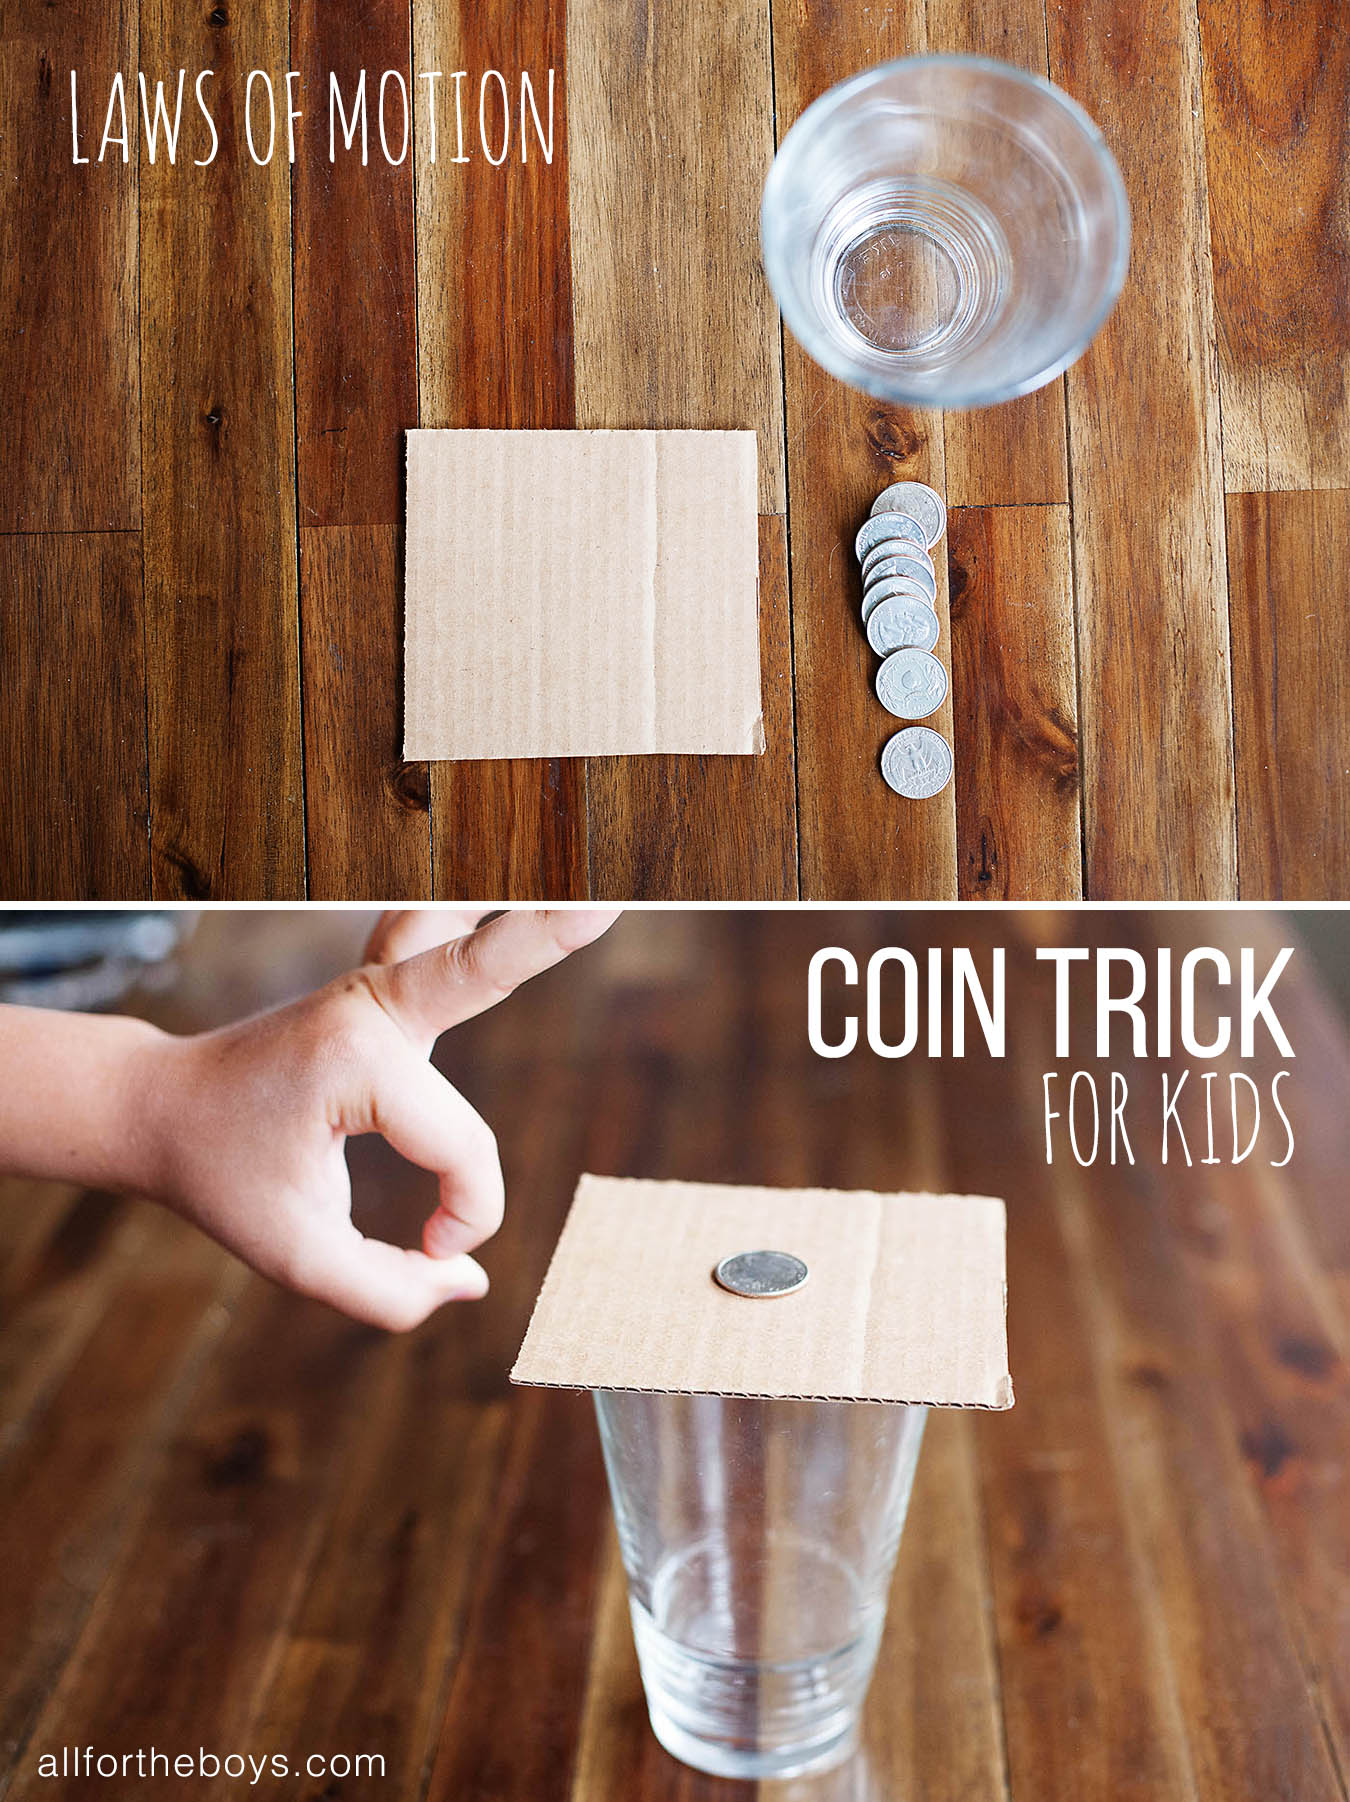 Laws of motion coin trick for kids